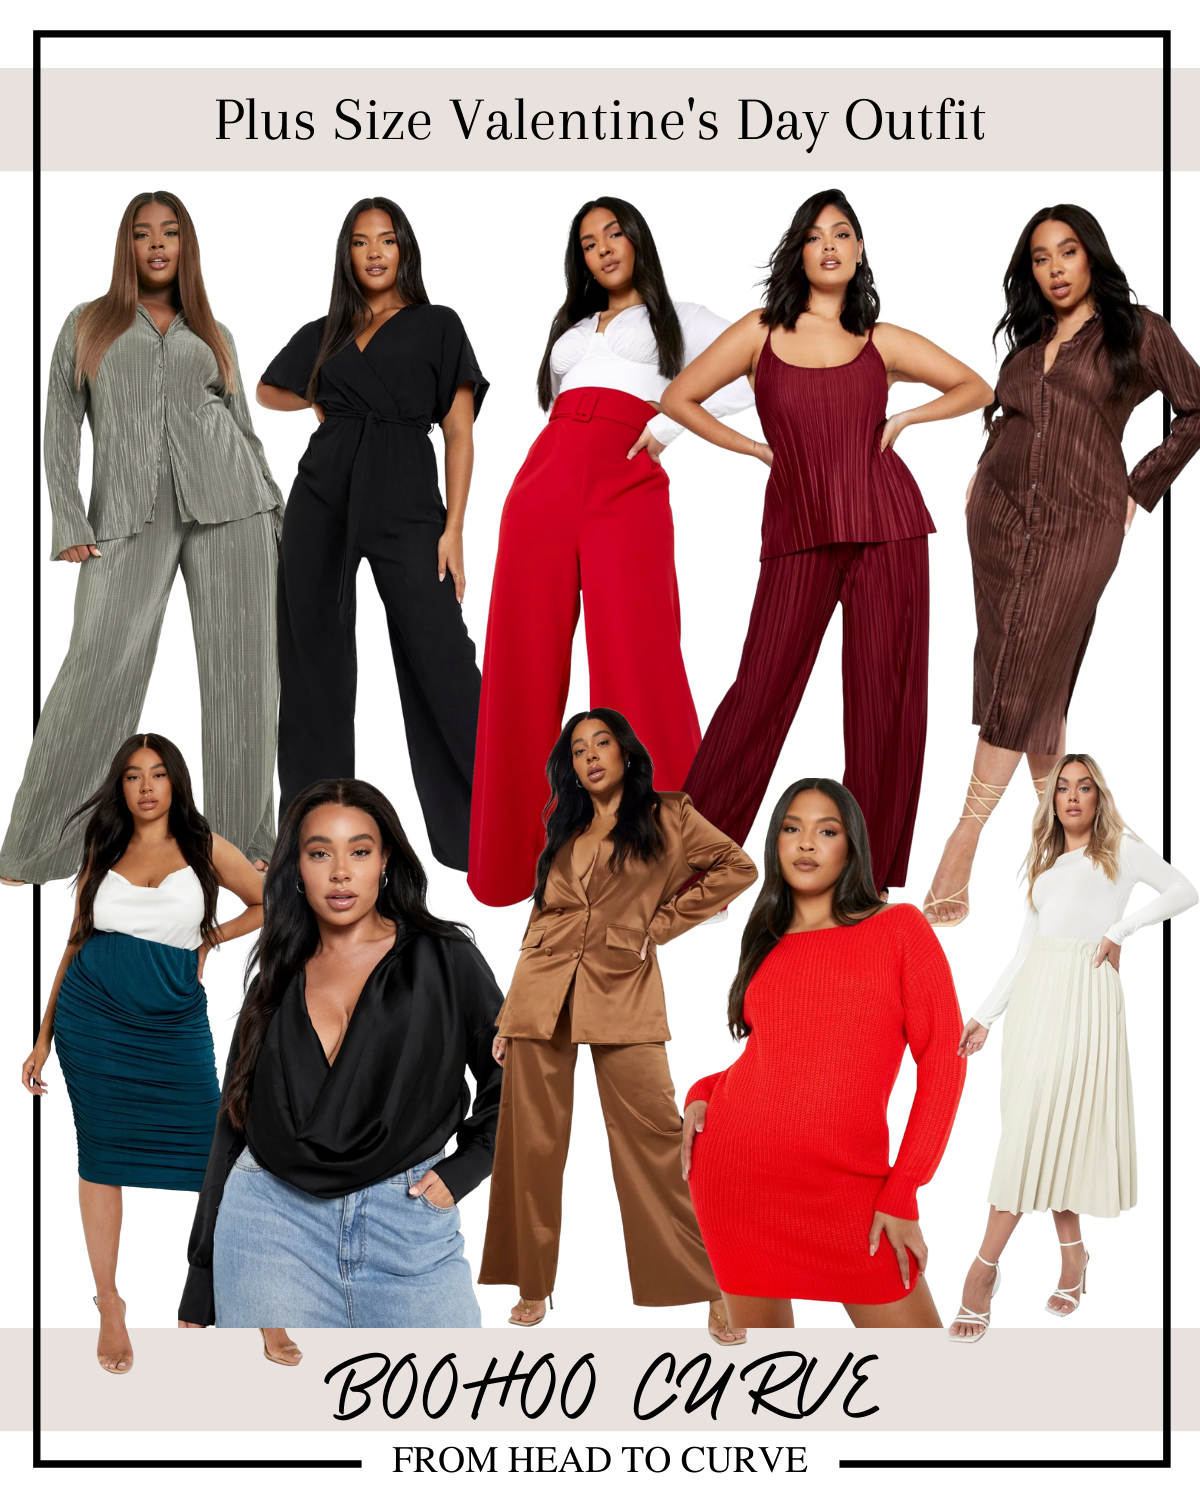 Plus Size clothing picks from Boohoo for Valentines Day outfit ideas